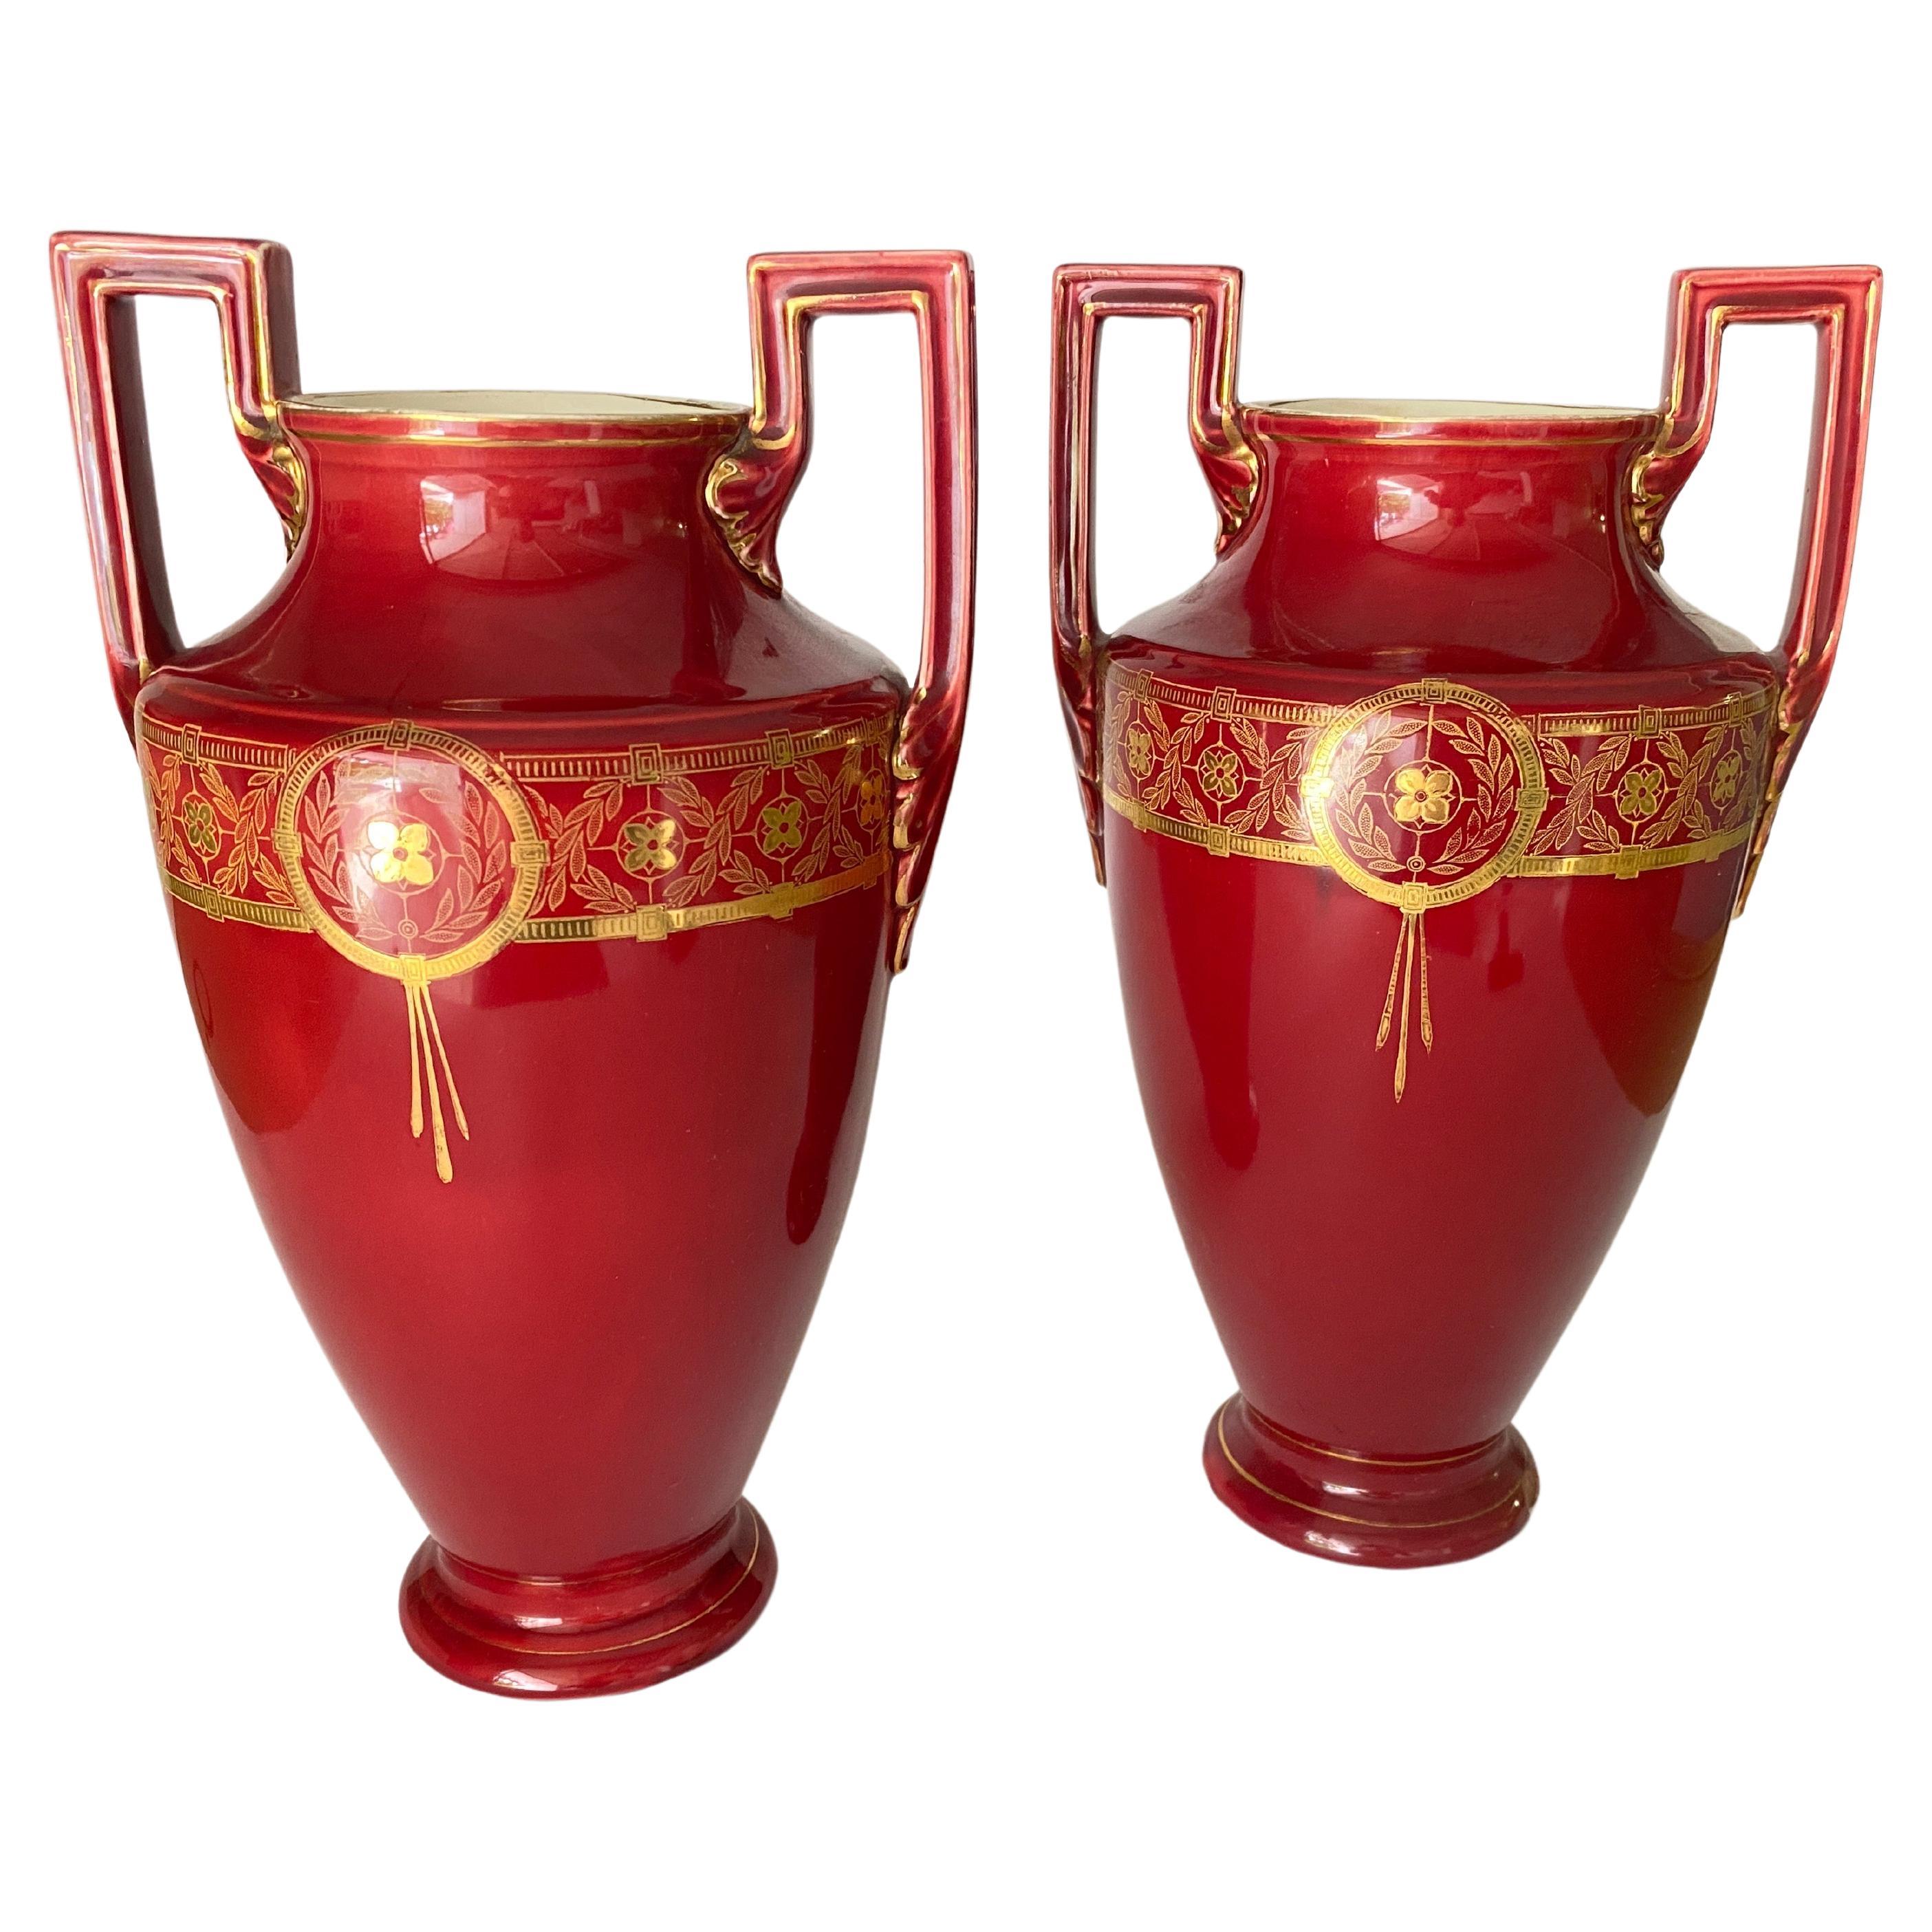 Pair of red cobalt urns Vase with ceramic handles and Gilted decorations For Sale